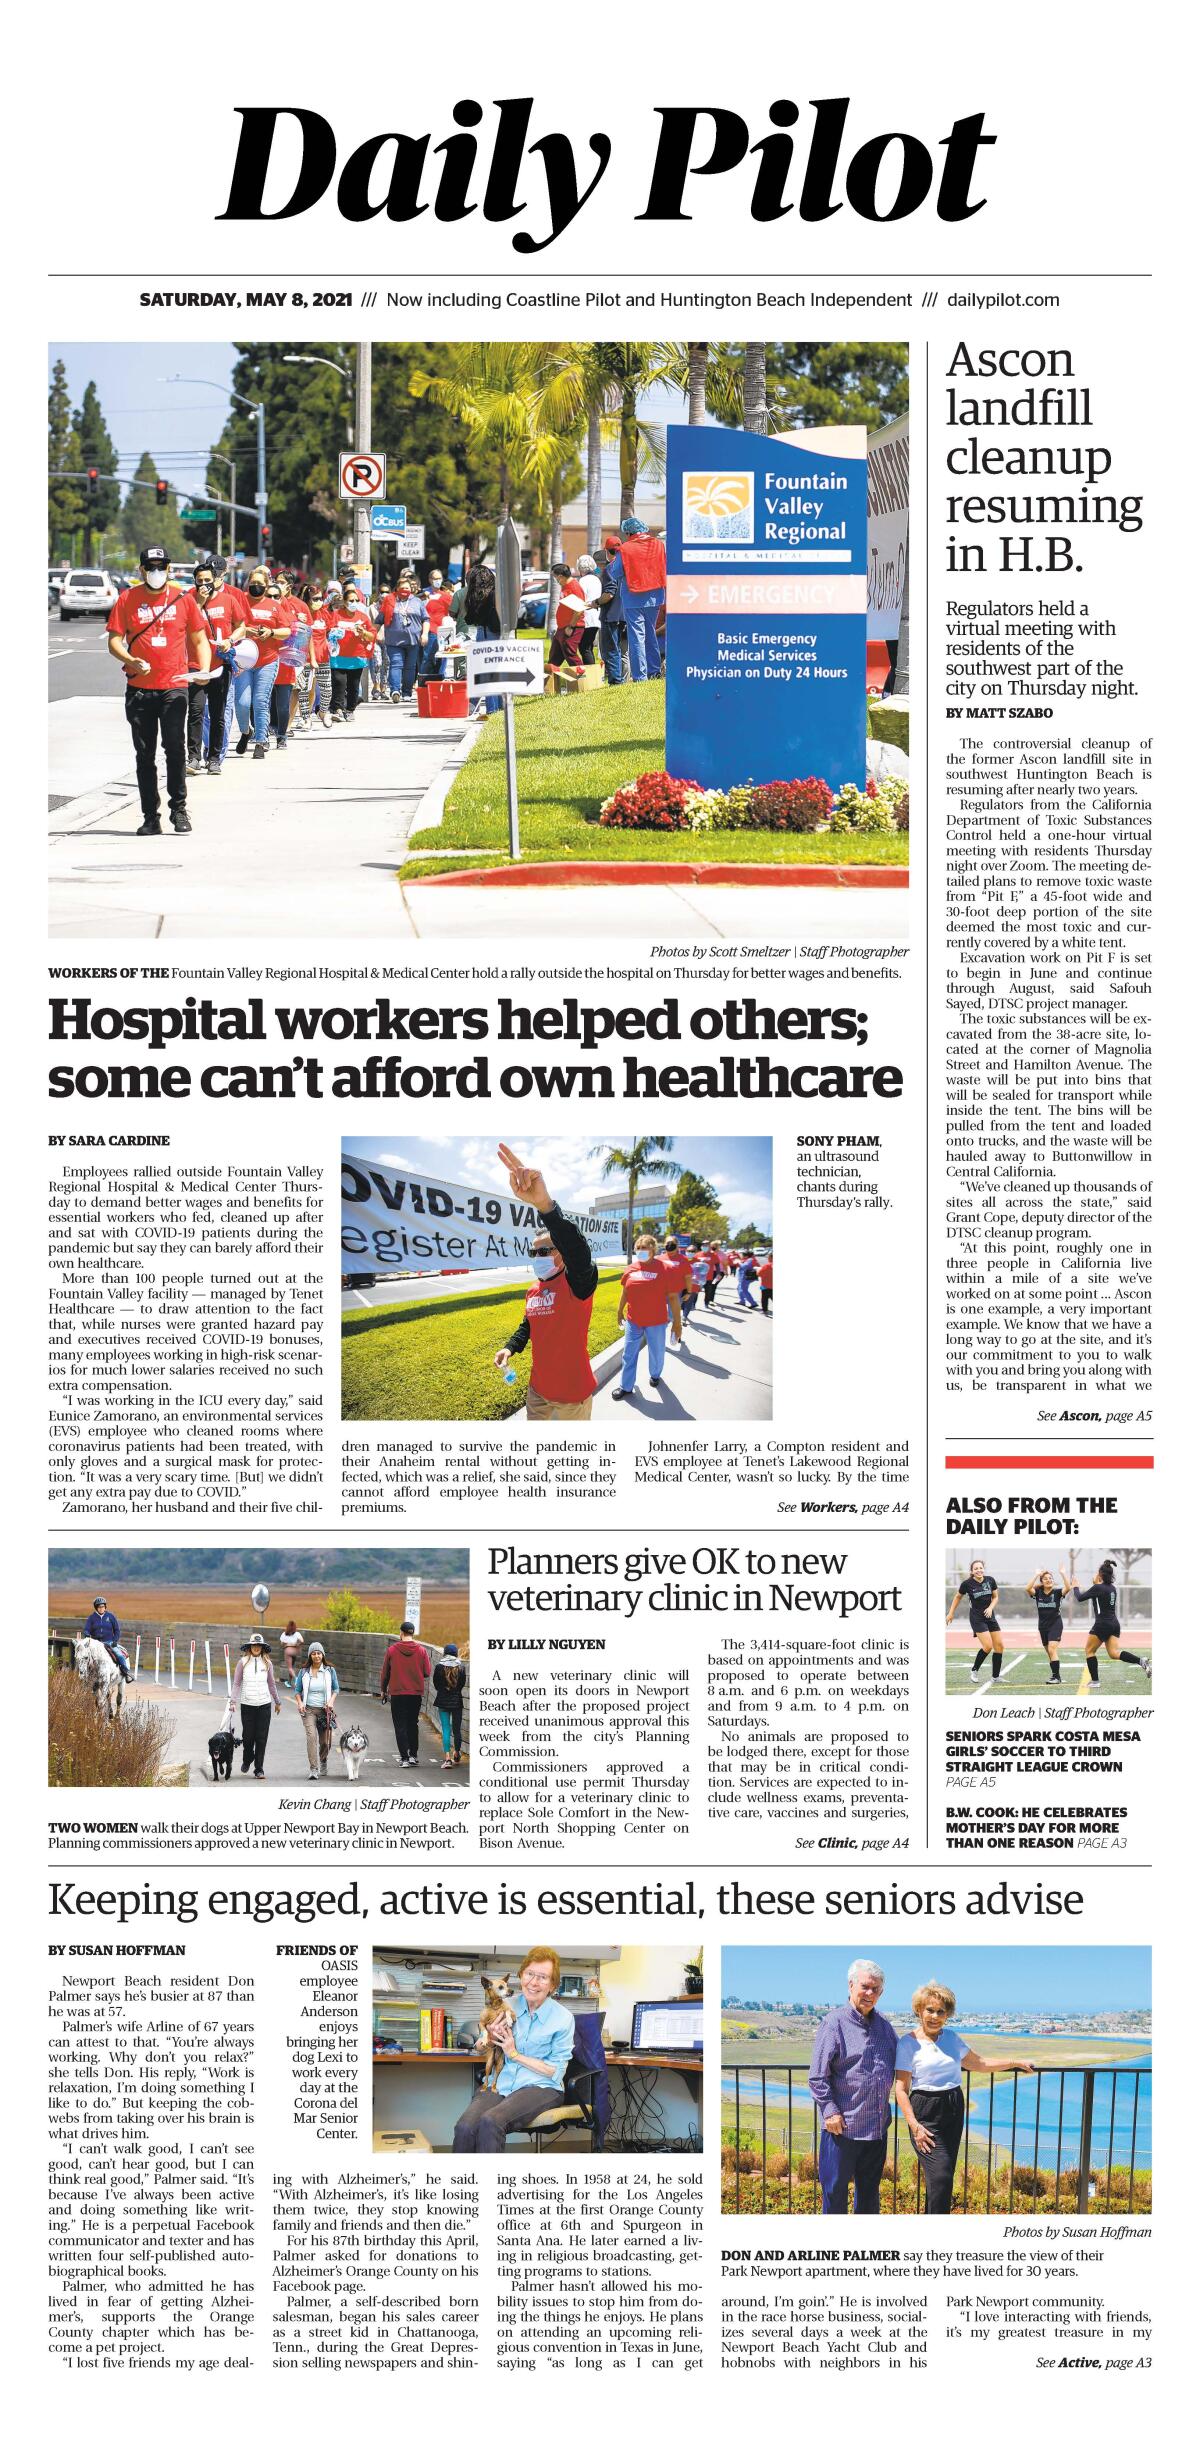 Front page of Daily Pilot e-newspaper for Saturday, May 8, 2021.